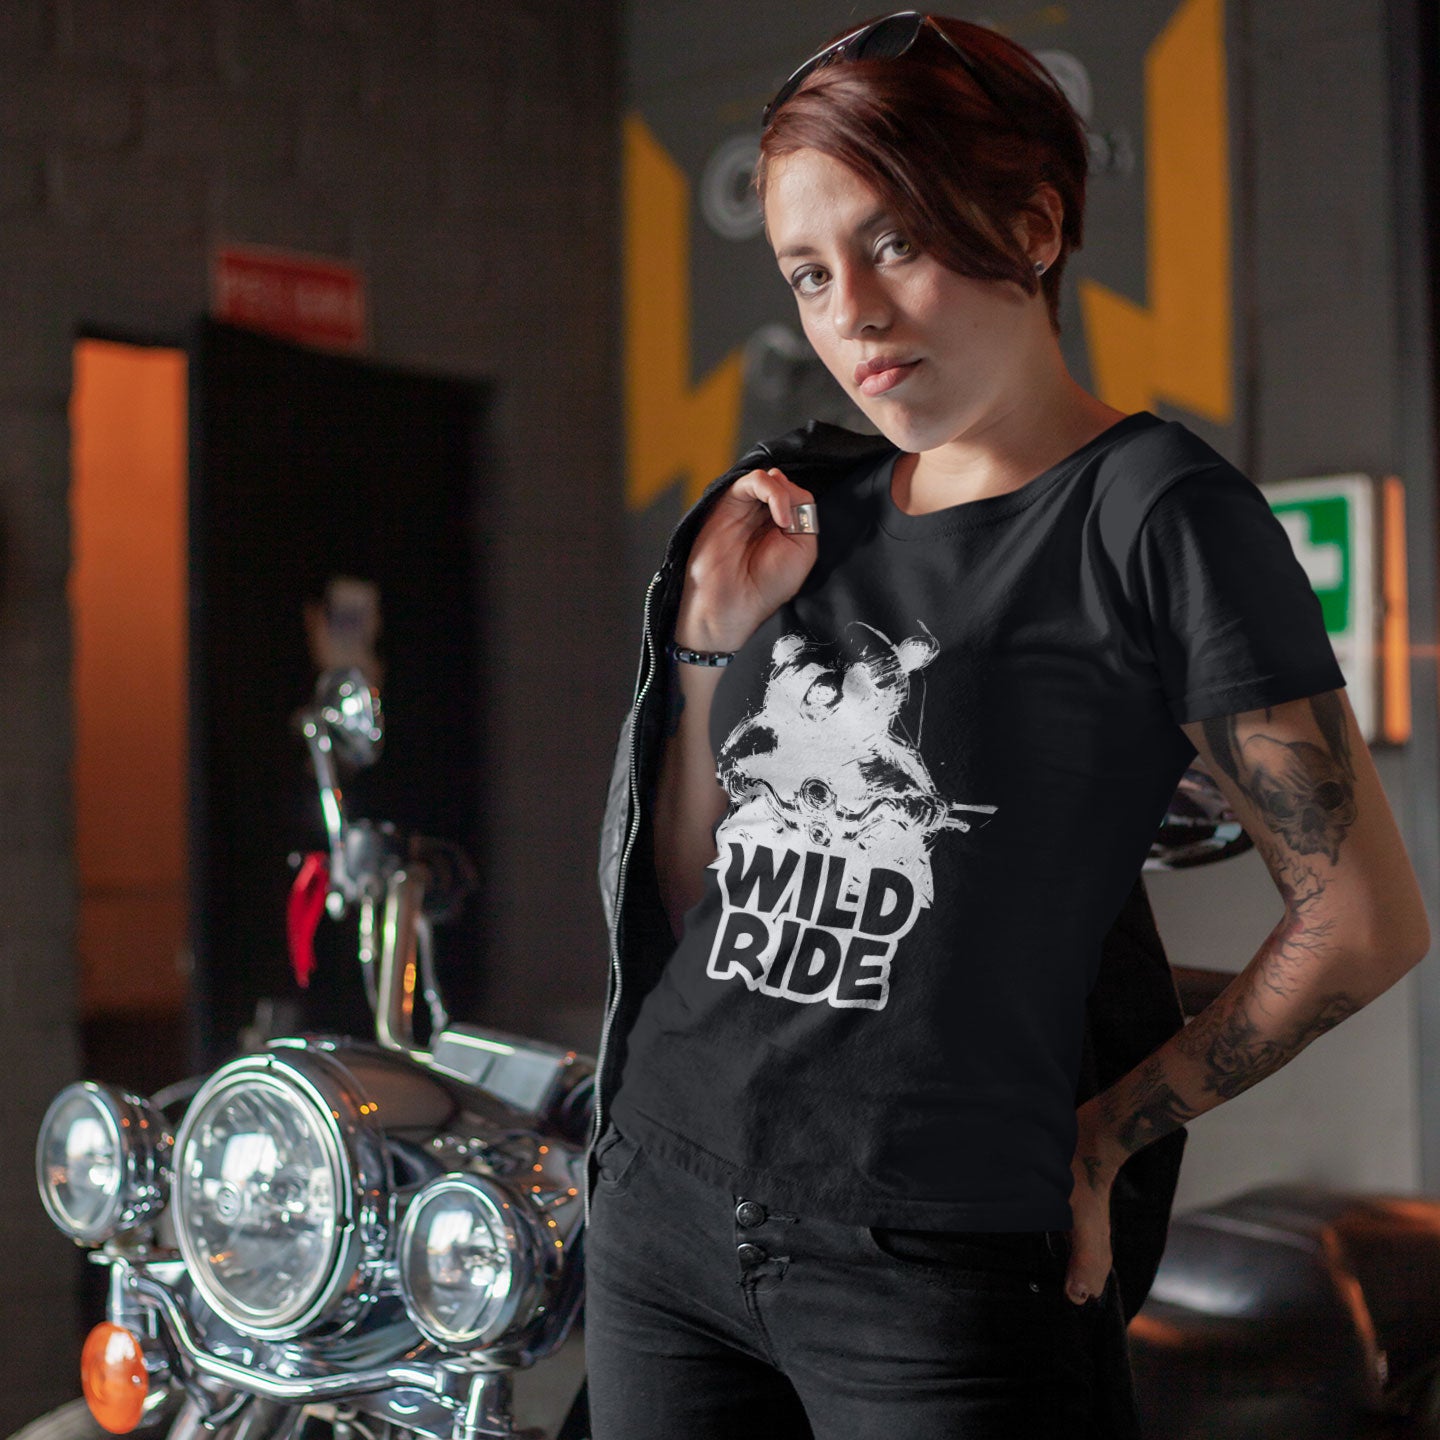 Woman standing by motorcycle wearing a black t-shirt with a bear on a bike with Wild Ride caption